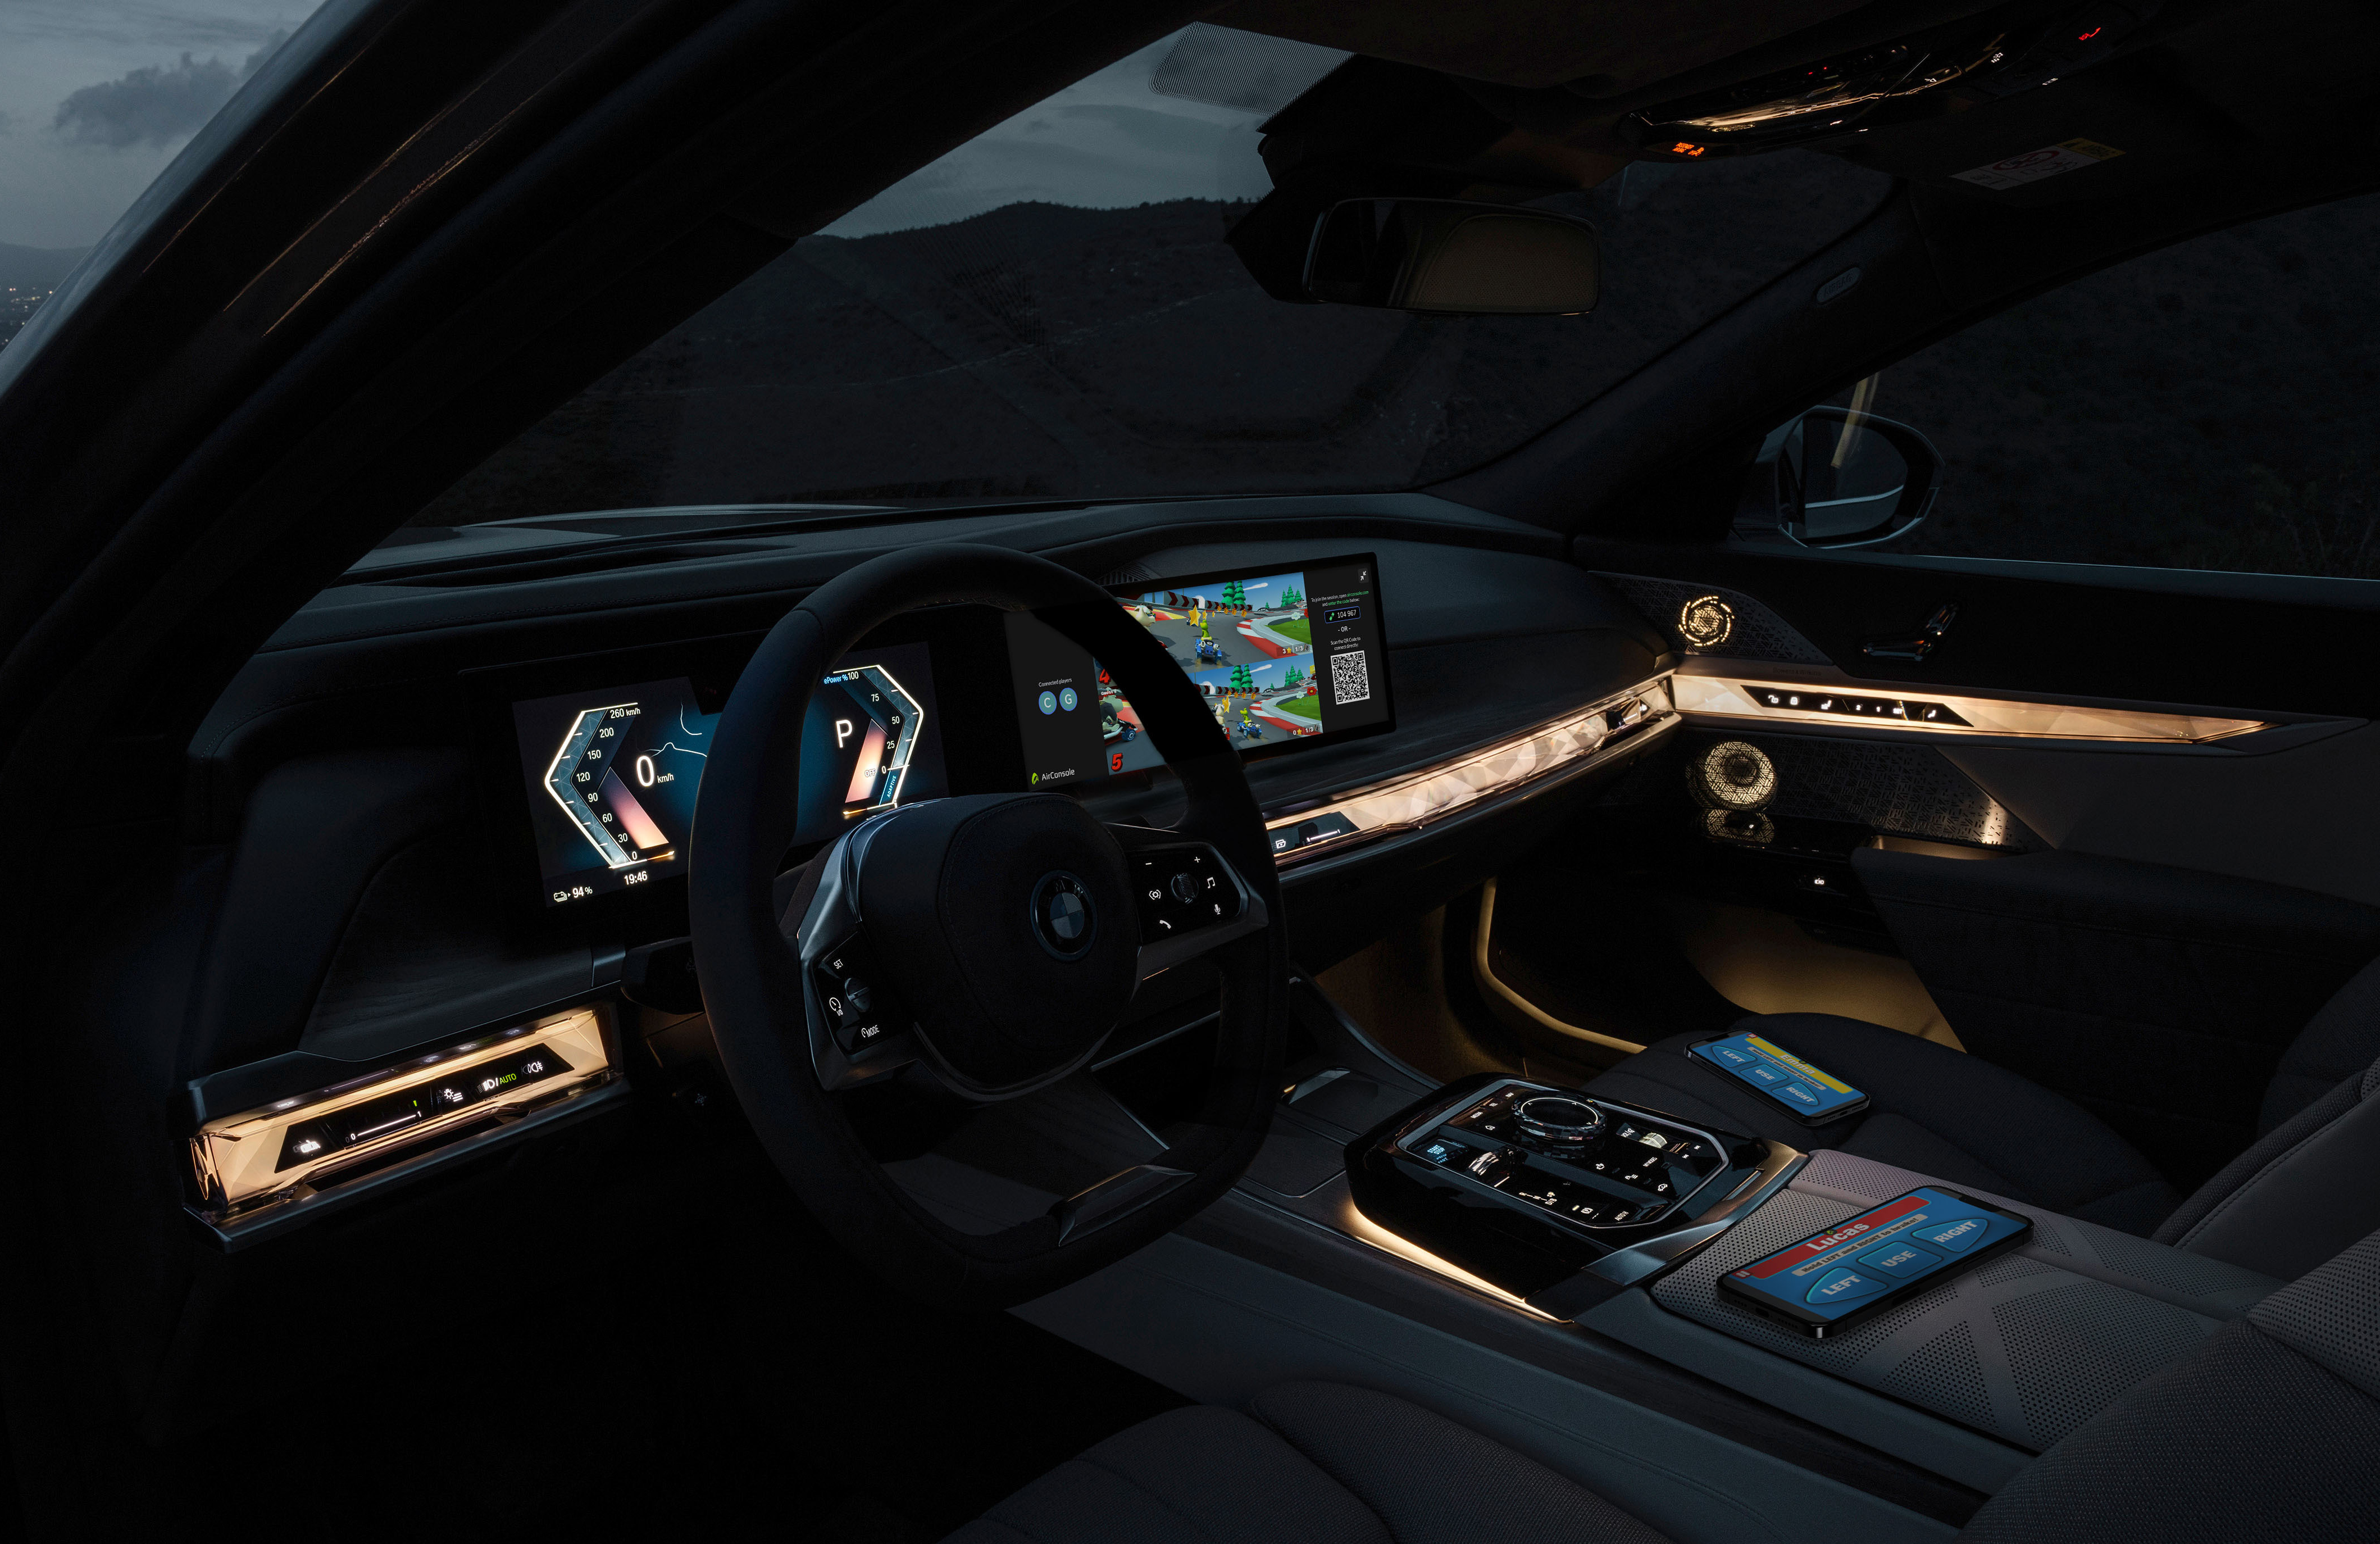 BMW Group partners with AirConsole to bring casual gaming to vehicles.